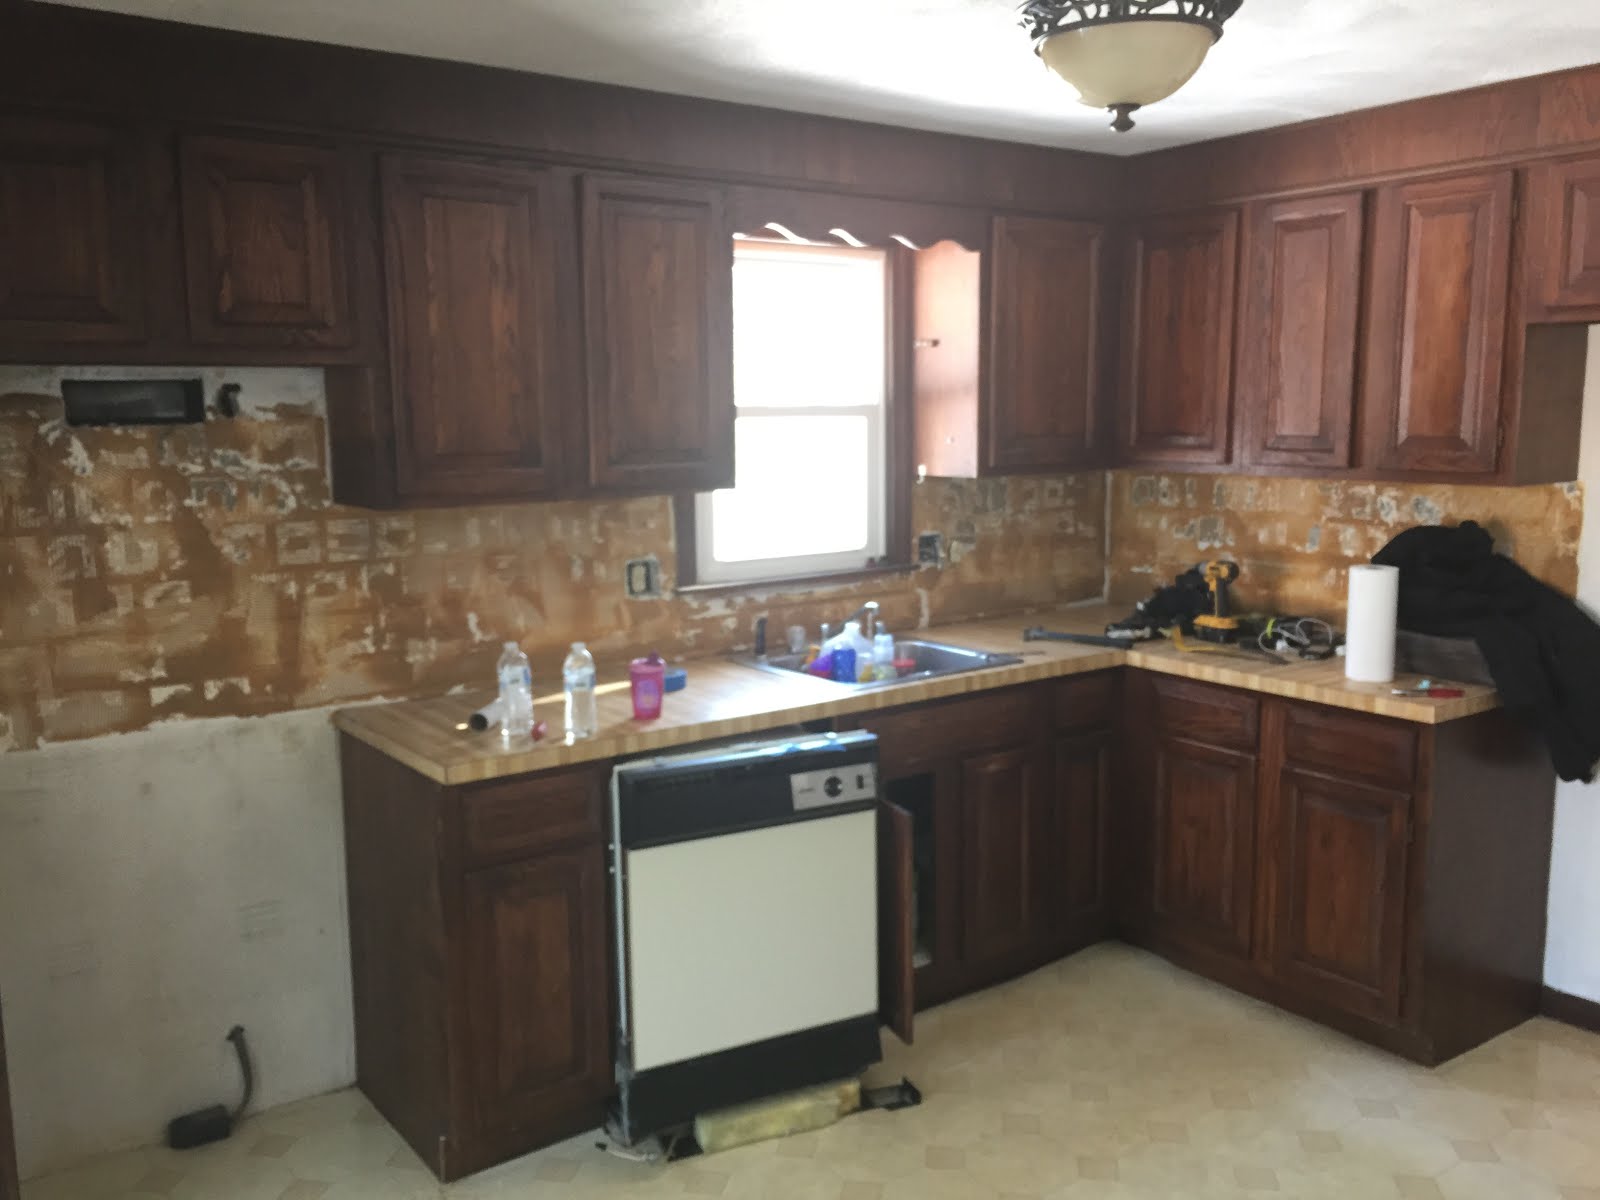 Musings By Candace Jean Kitchen Remodel Series Kitchen Overview